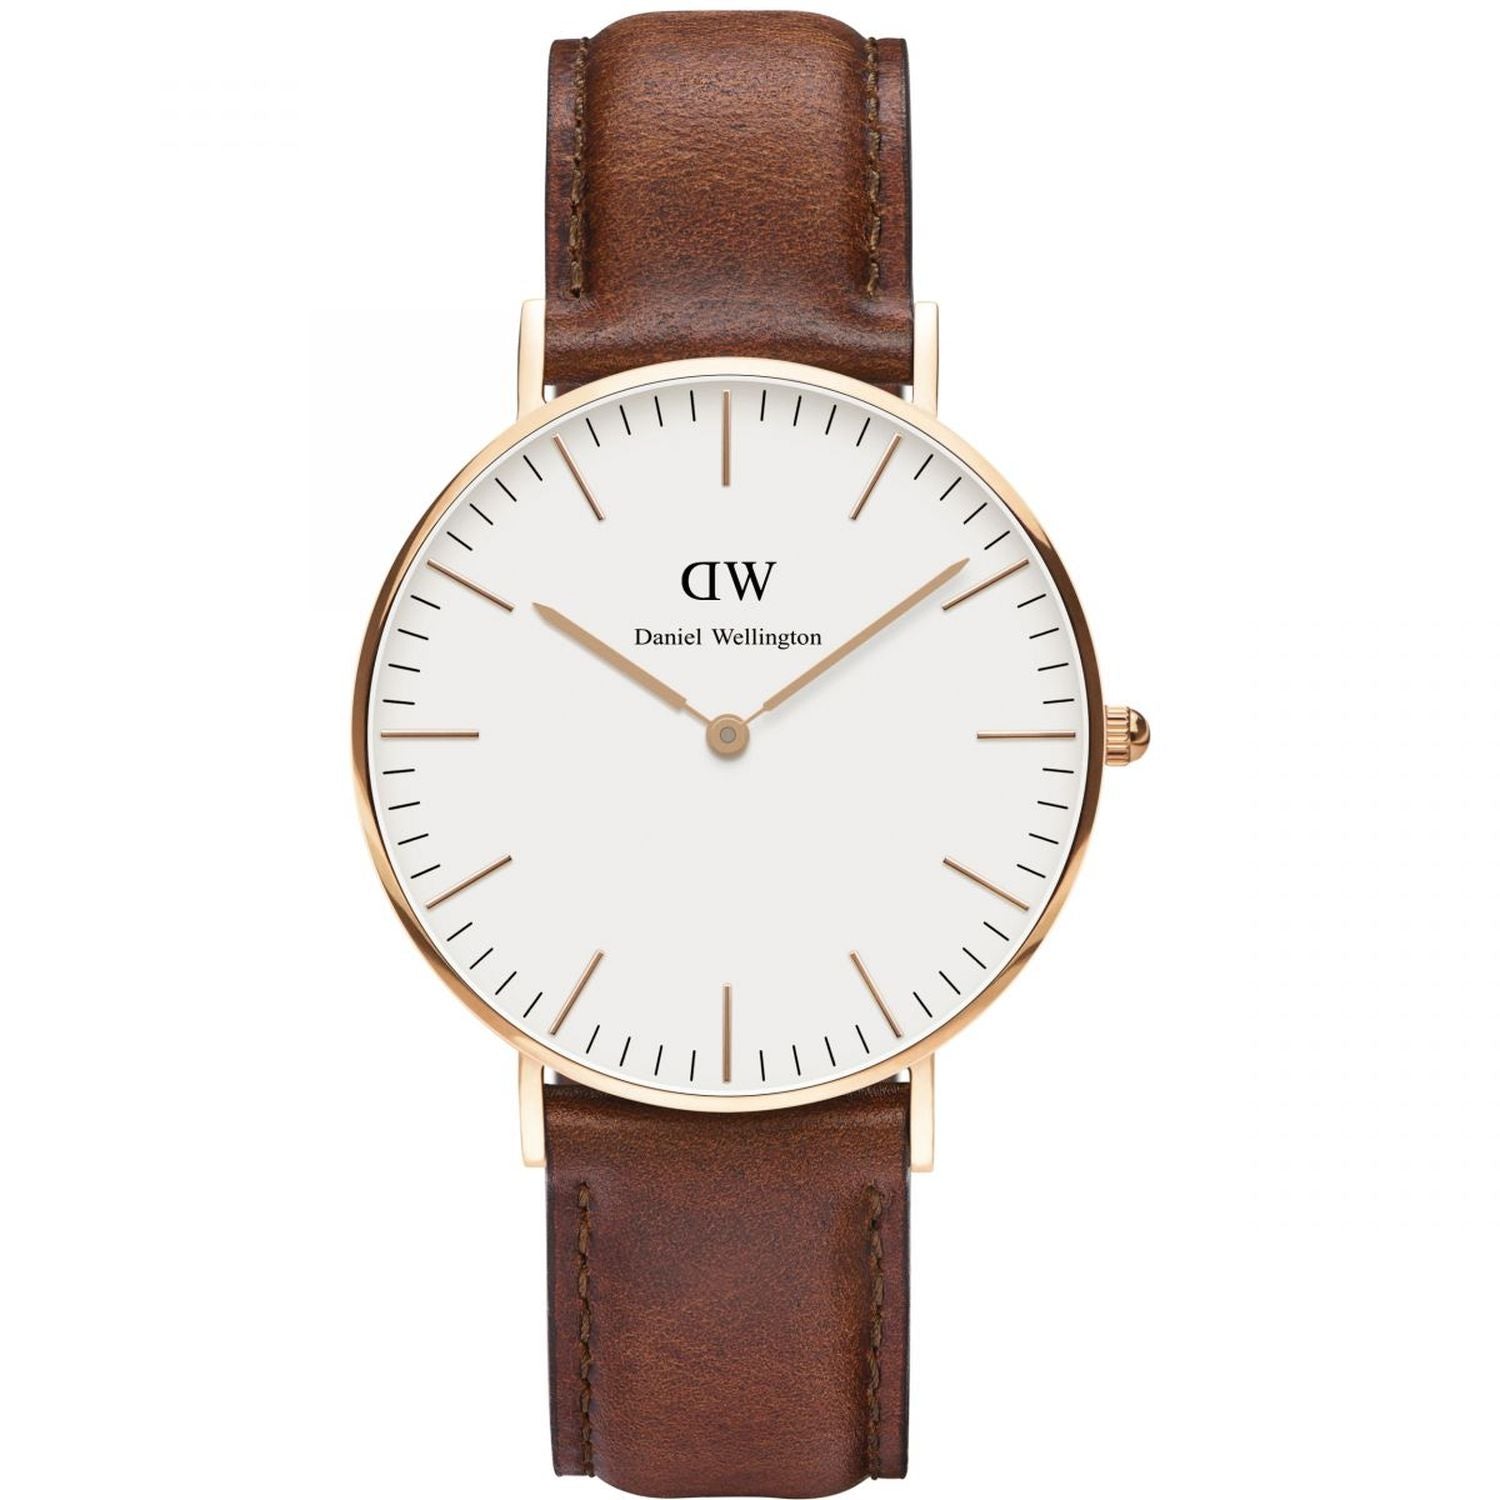 DW Classic St Mawes 36mm - London Time Watches 